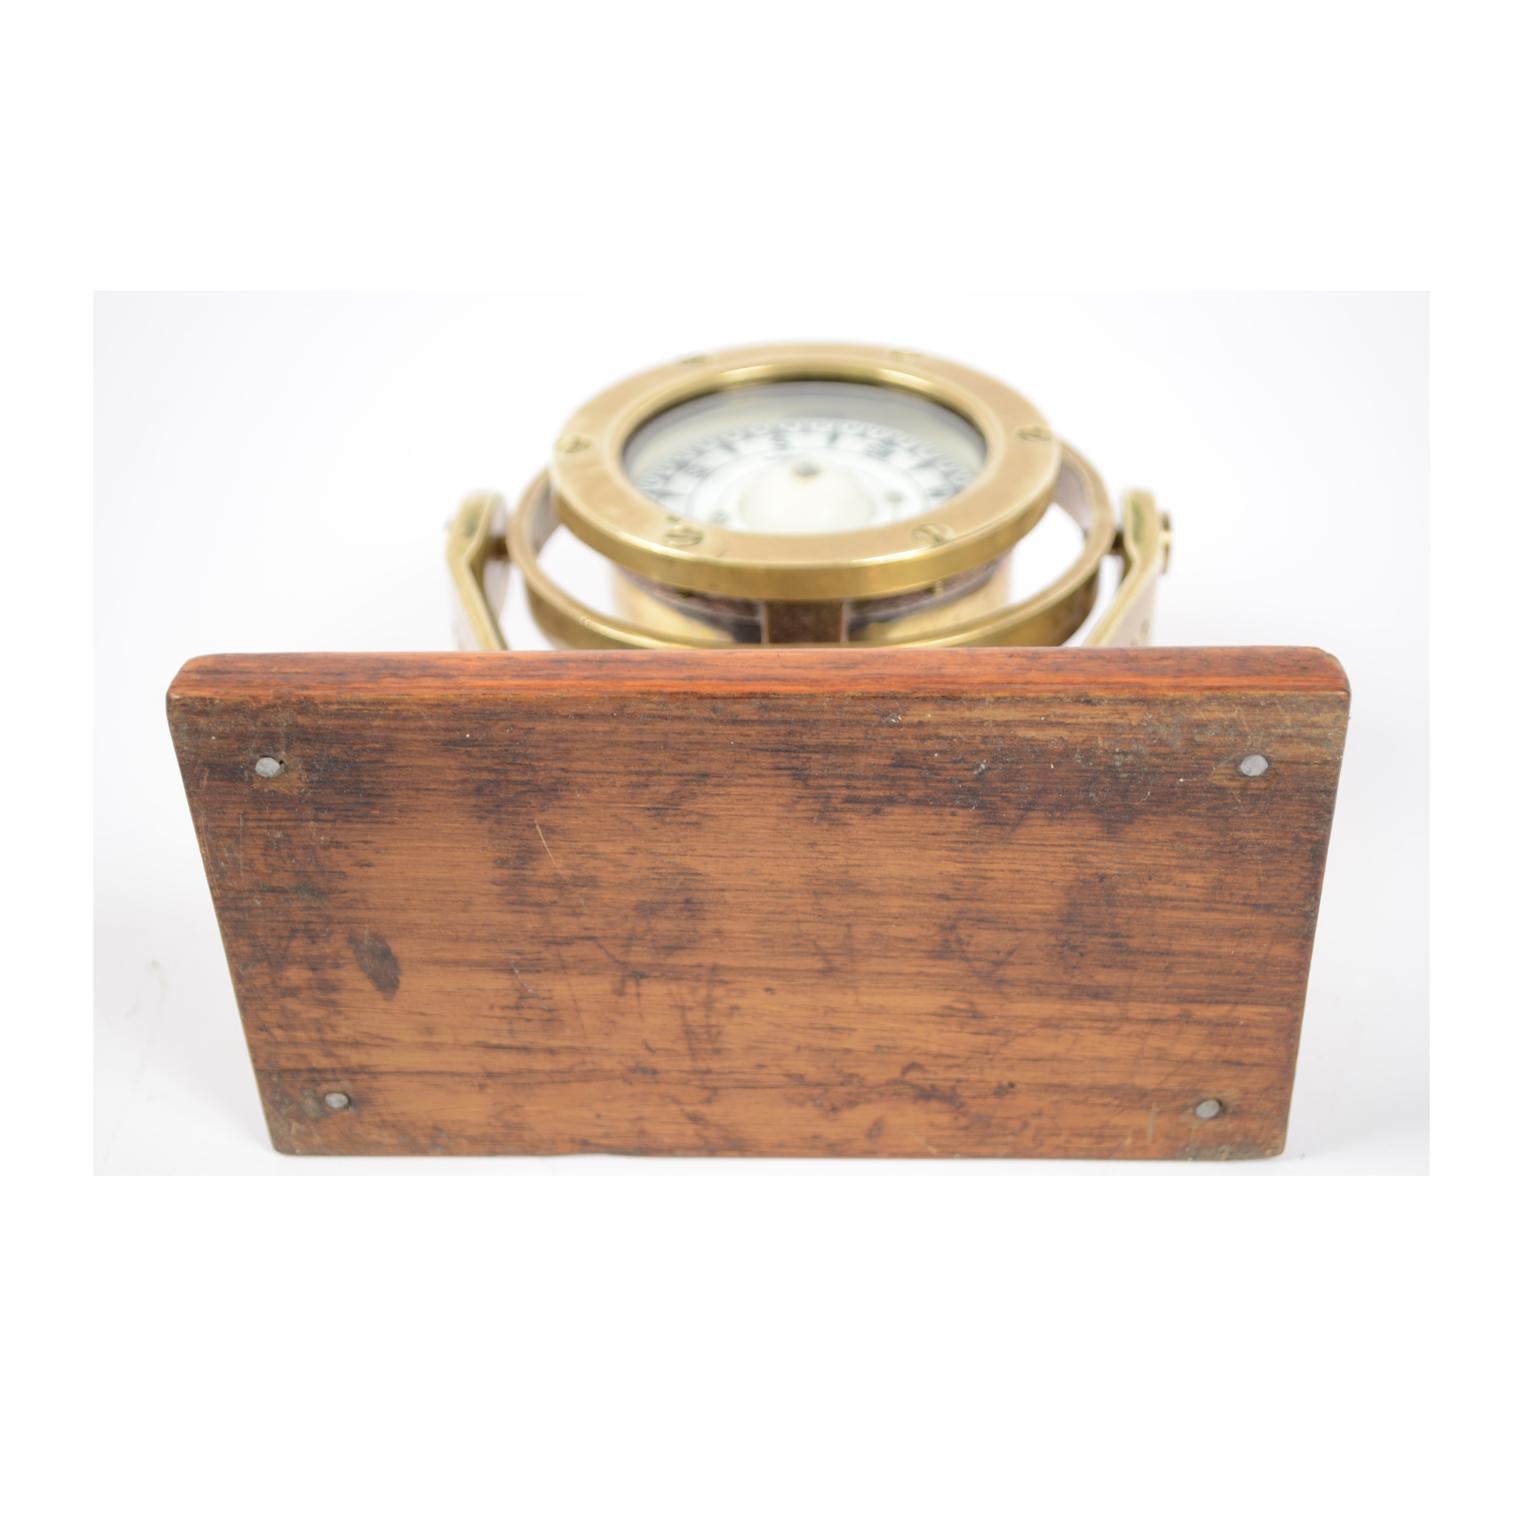 Mid-19th Century Brass and Glass Nautical Compass on Oak Wooden Board, London, 1860